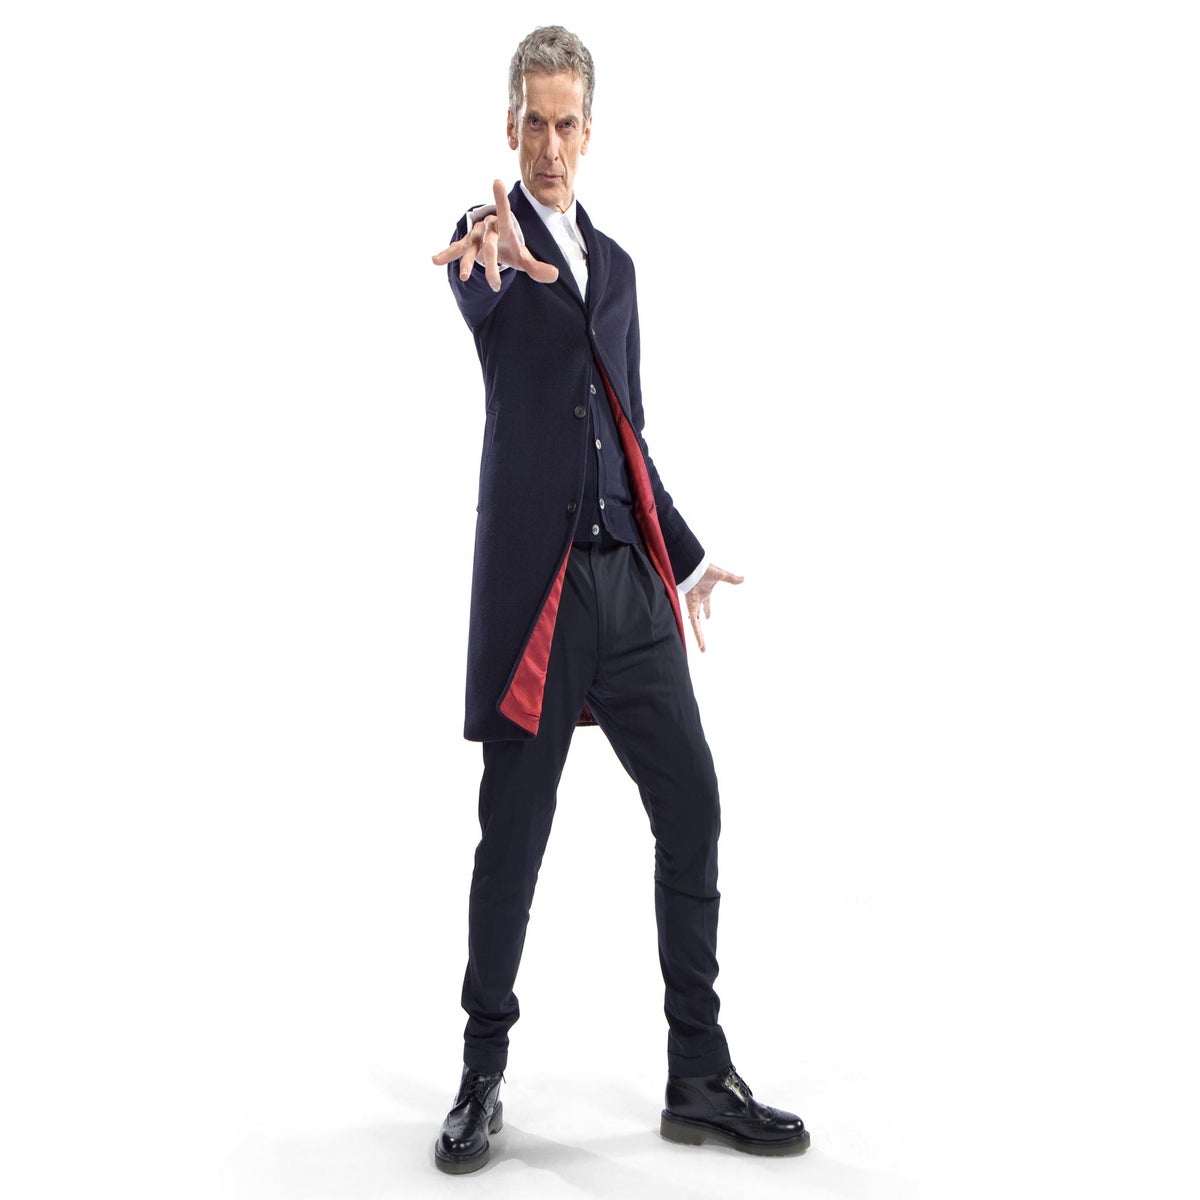 David Tennant dressed up as Peter Capaldi's Twelfth Doctor and it